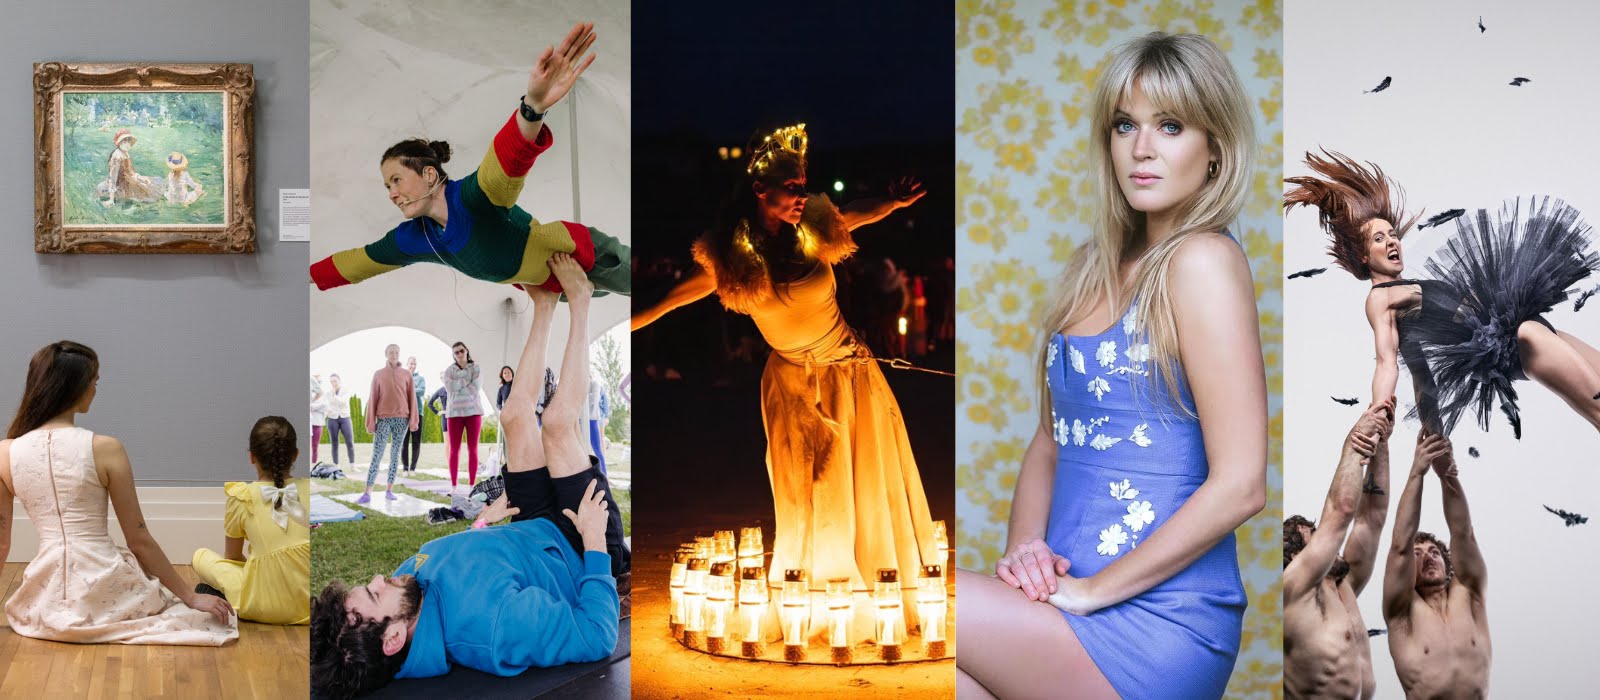 July Guide: 16 of the best festivals and events happening this month